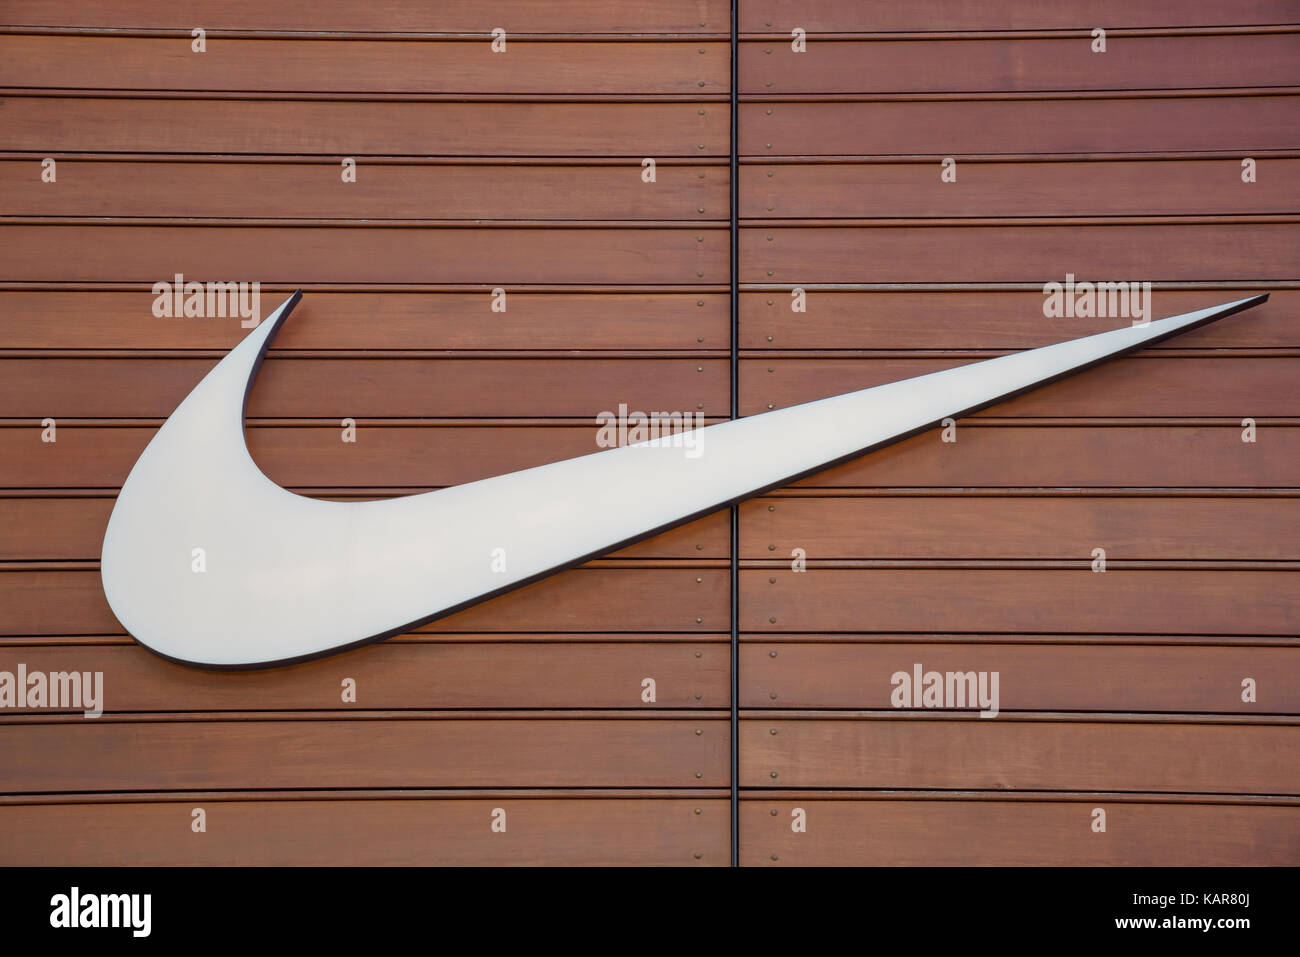 Nike logo High Resolution Stock Photography and Images - Alamy